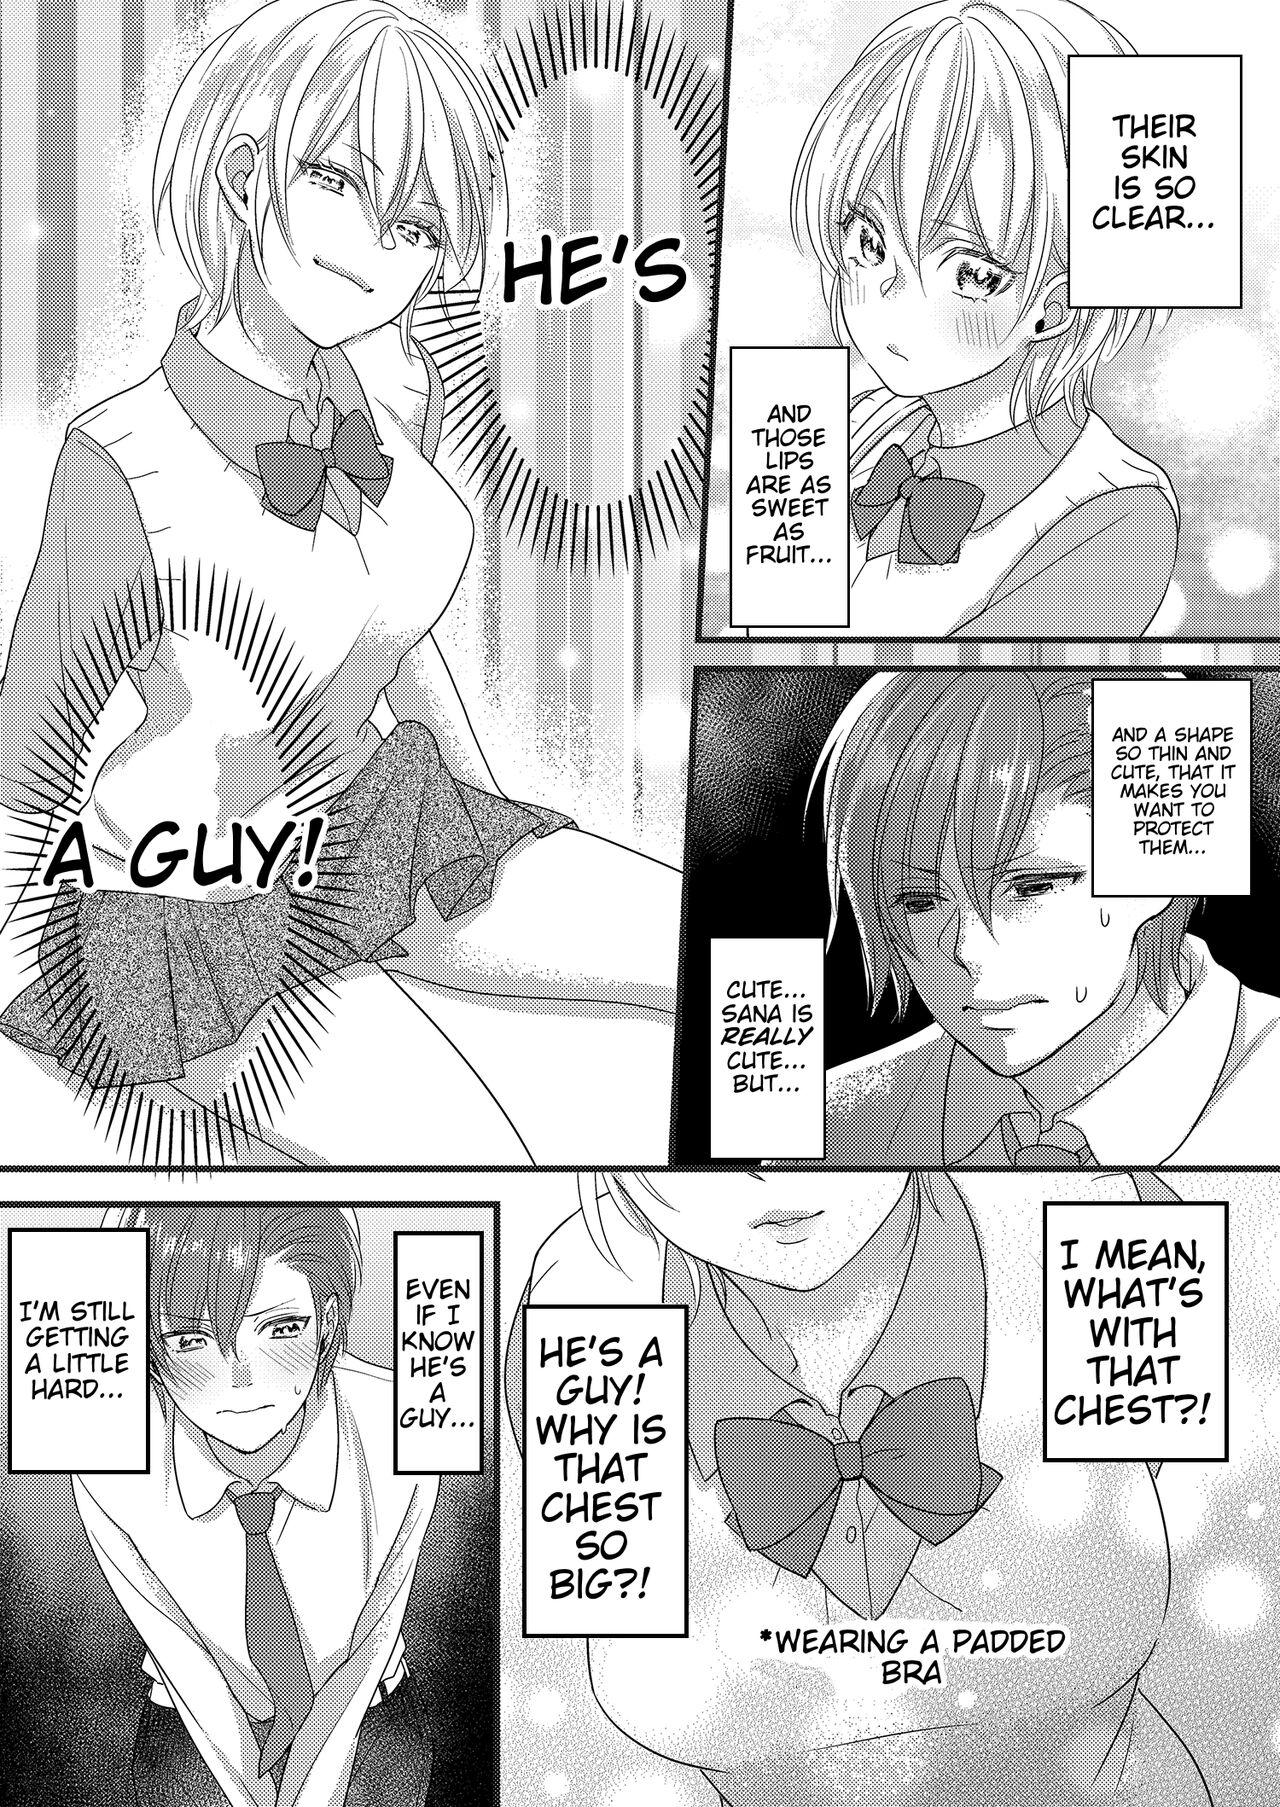 Perverted Haru and Sana ～Love Connected Through Cosplay～ - Original Culo - Page 3